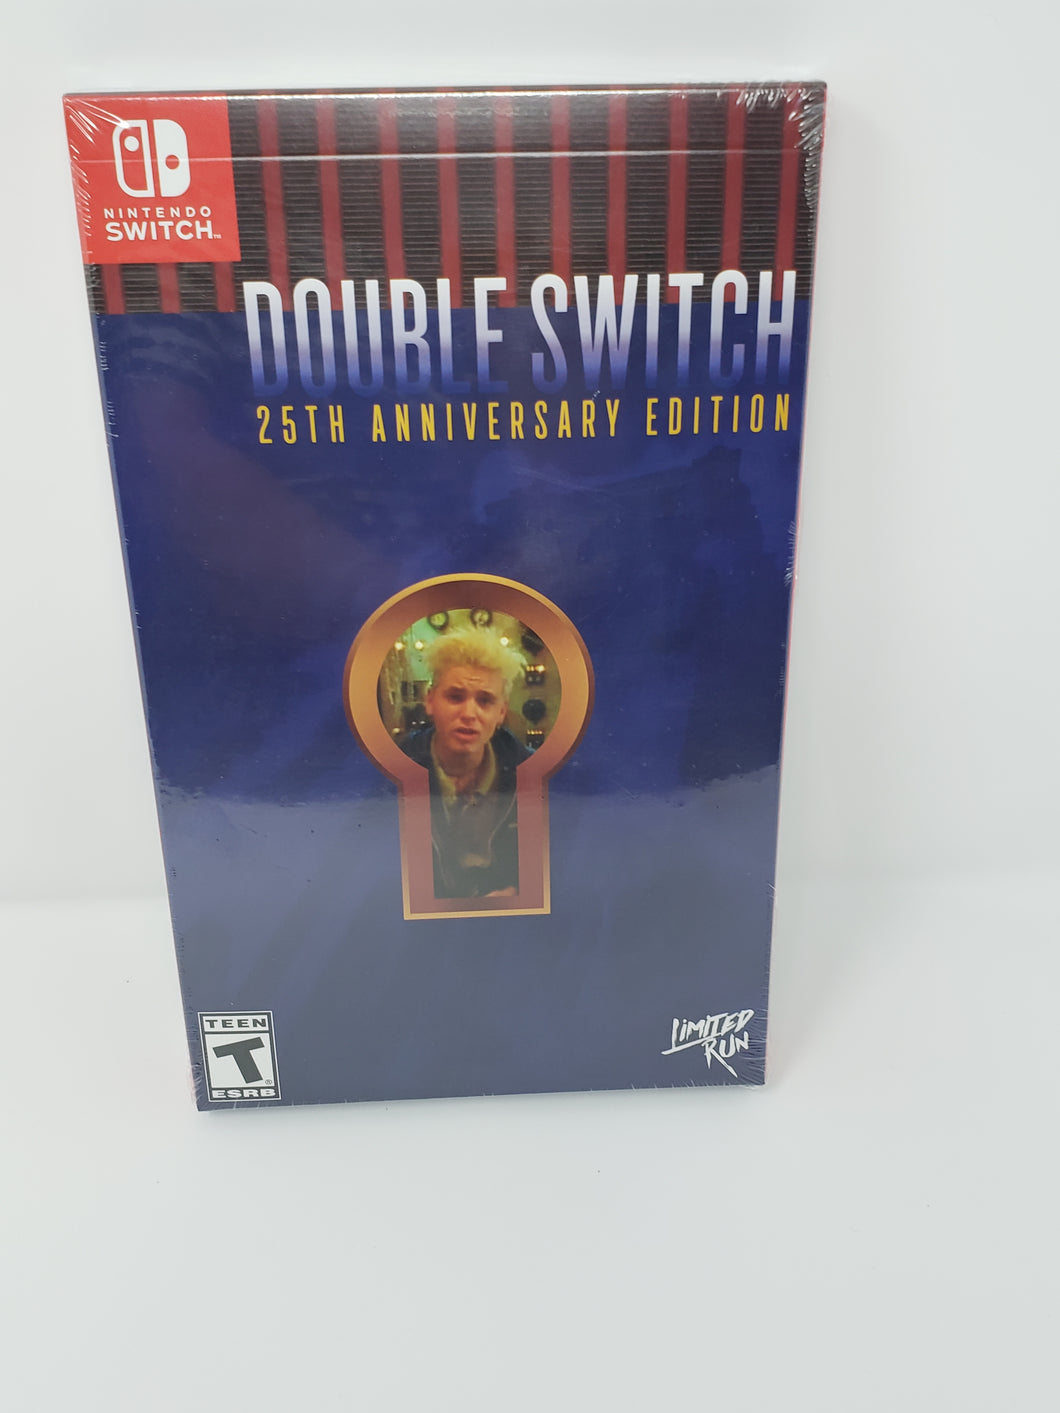 Double Switch 25th Anniversary Edition Collector's Edition LRG [neuf] - Nintendo Switch